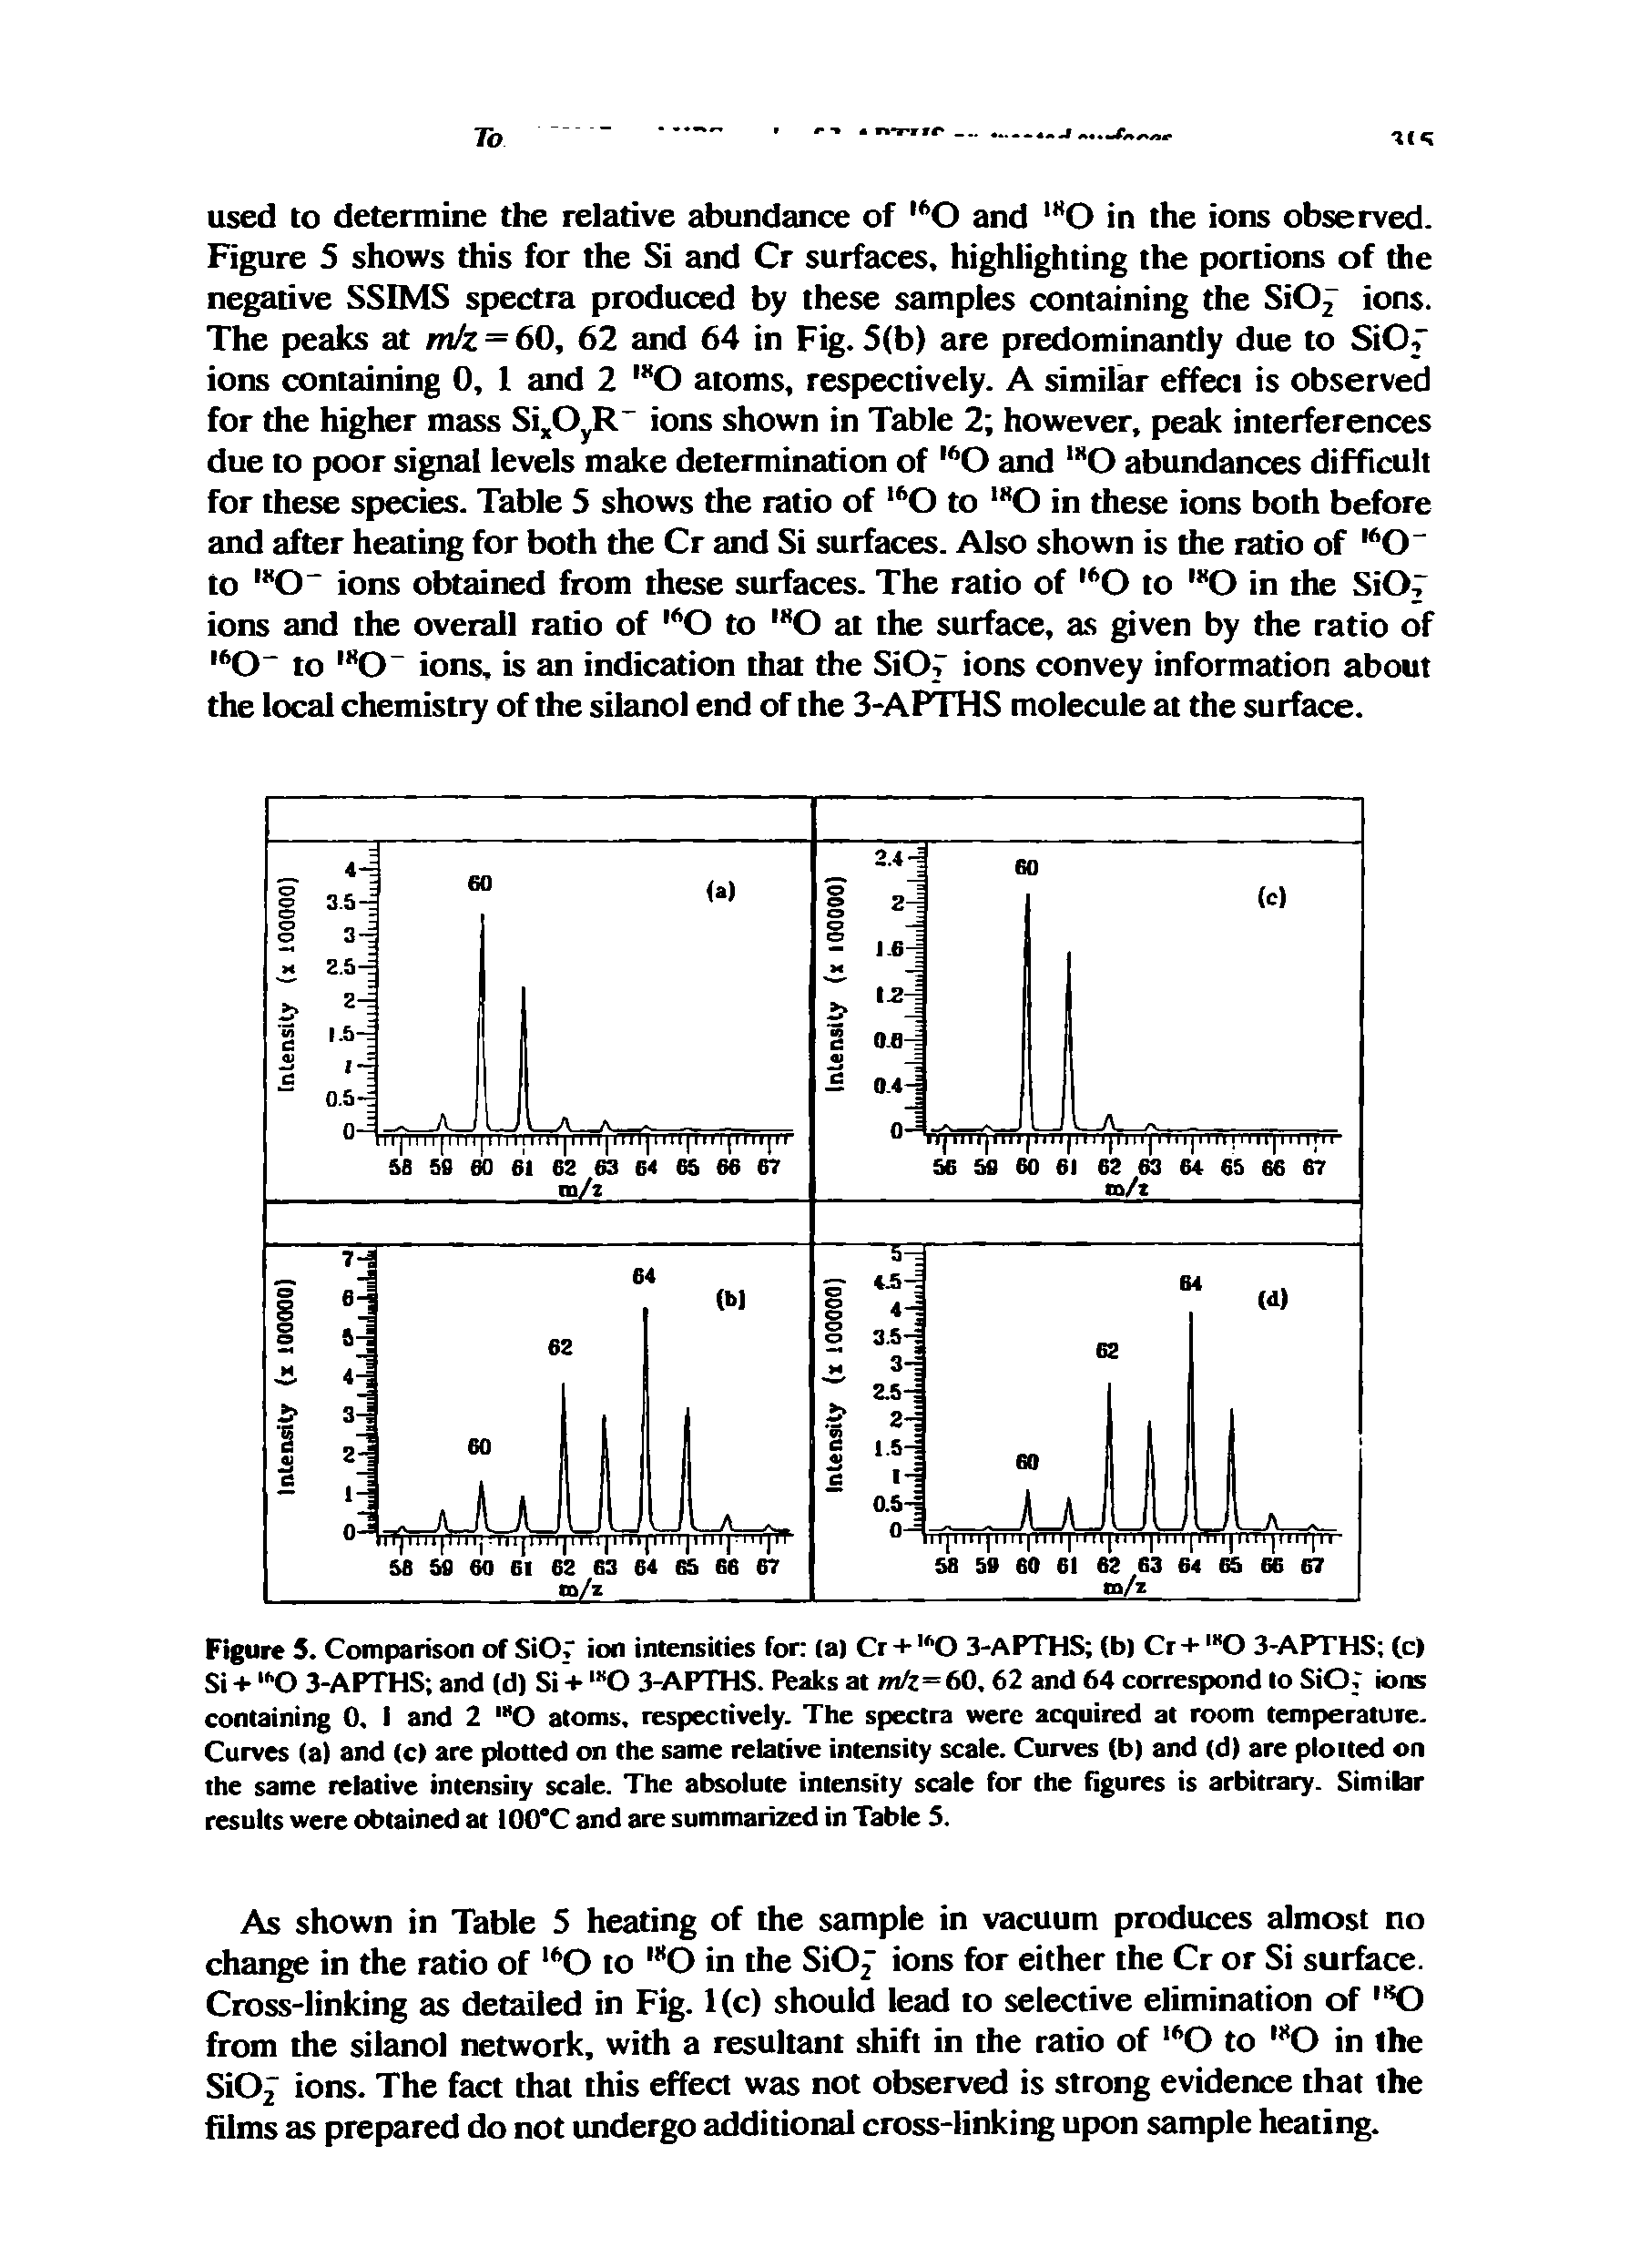 Figure 5. Comparison of SiOf ion intensities for (a) Cr + O 3-APTHS (b) Cr + O 3-APTHS (c) Si + " O 3-APTHS and (d) Si + "O 3-APTHS. Peaks at m z=60,62 and 64 correspond to SiO," ions containing 0, I and 2 O atoms, respectively. The spectra were acquired at room temperature. Curves (a) and (c) are plotted on the same relative intensity scale. Curves (b) and (d) are plotted on the same relative intensity scale. The absolute intensity scale for the figures is arbitrary. Similar results were obtained at 100 C and are summarized in Table S.